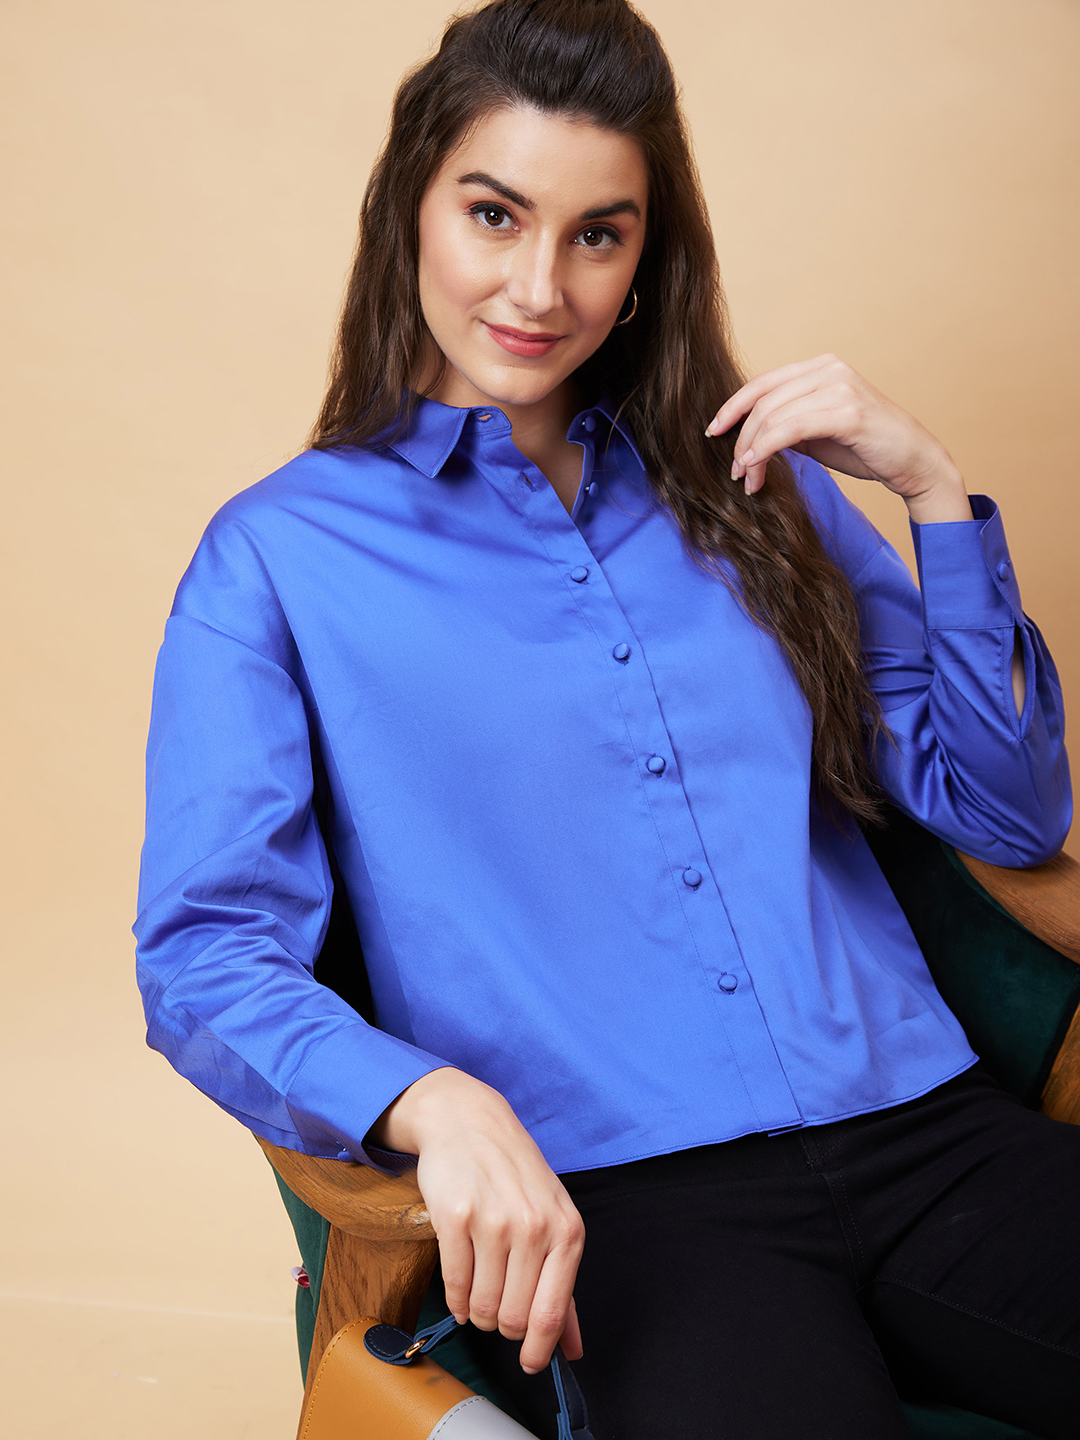 Globus Women Blue Solid Casual Button Down Shirt Style Top